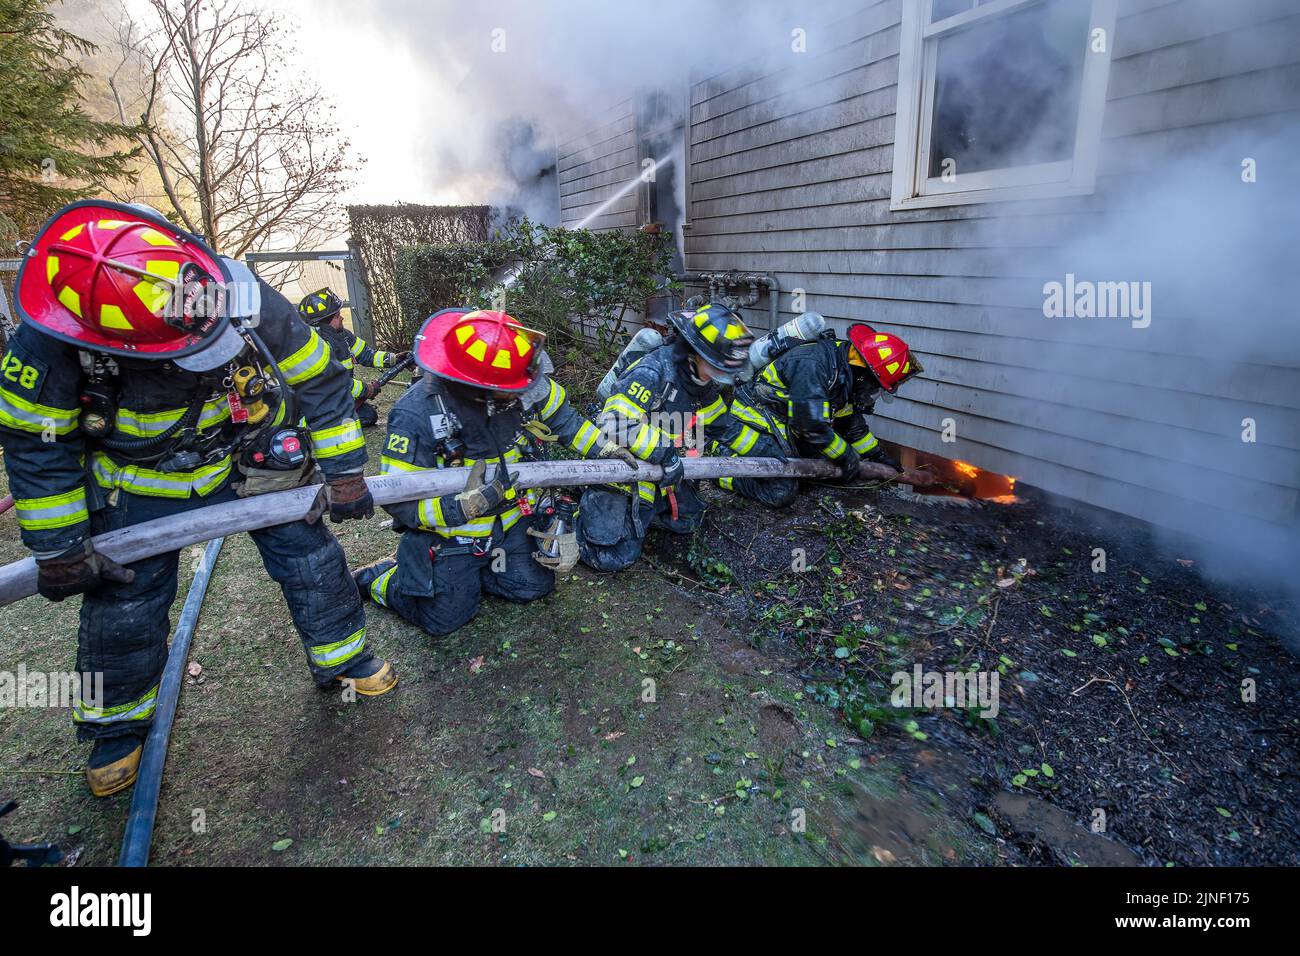 A four-man hose team uses a hose to spray water through a basement window to try to extinguish the fire within it as the Bridgehampton Fire Department Stock Photo